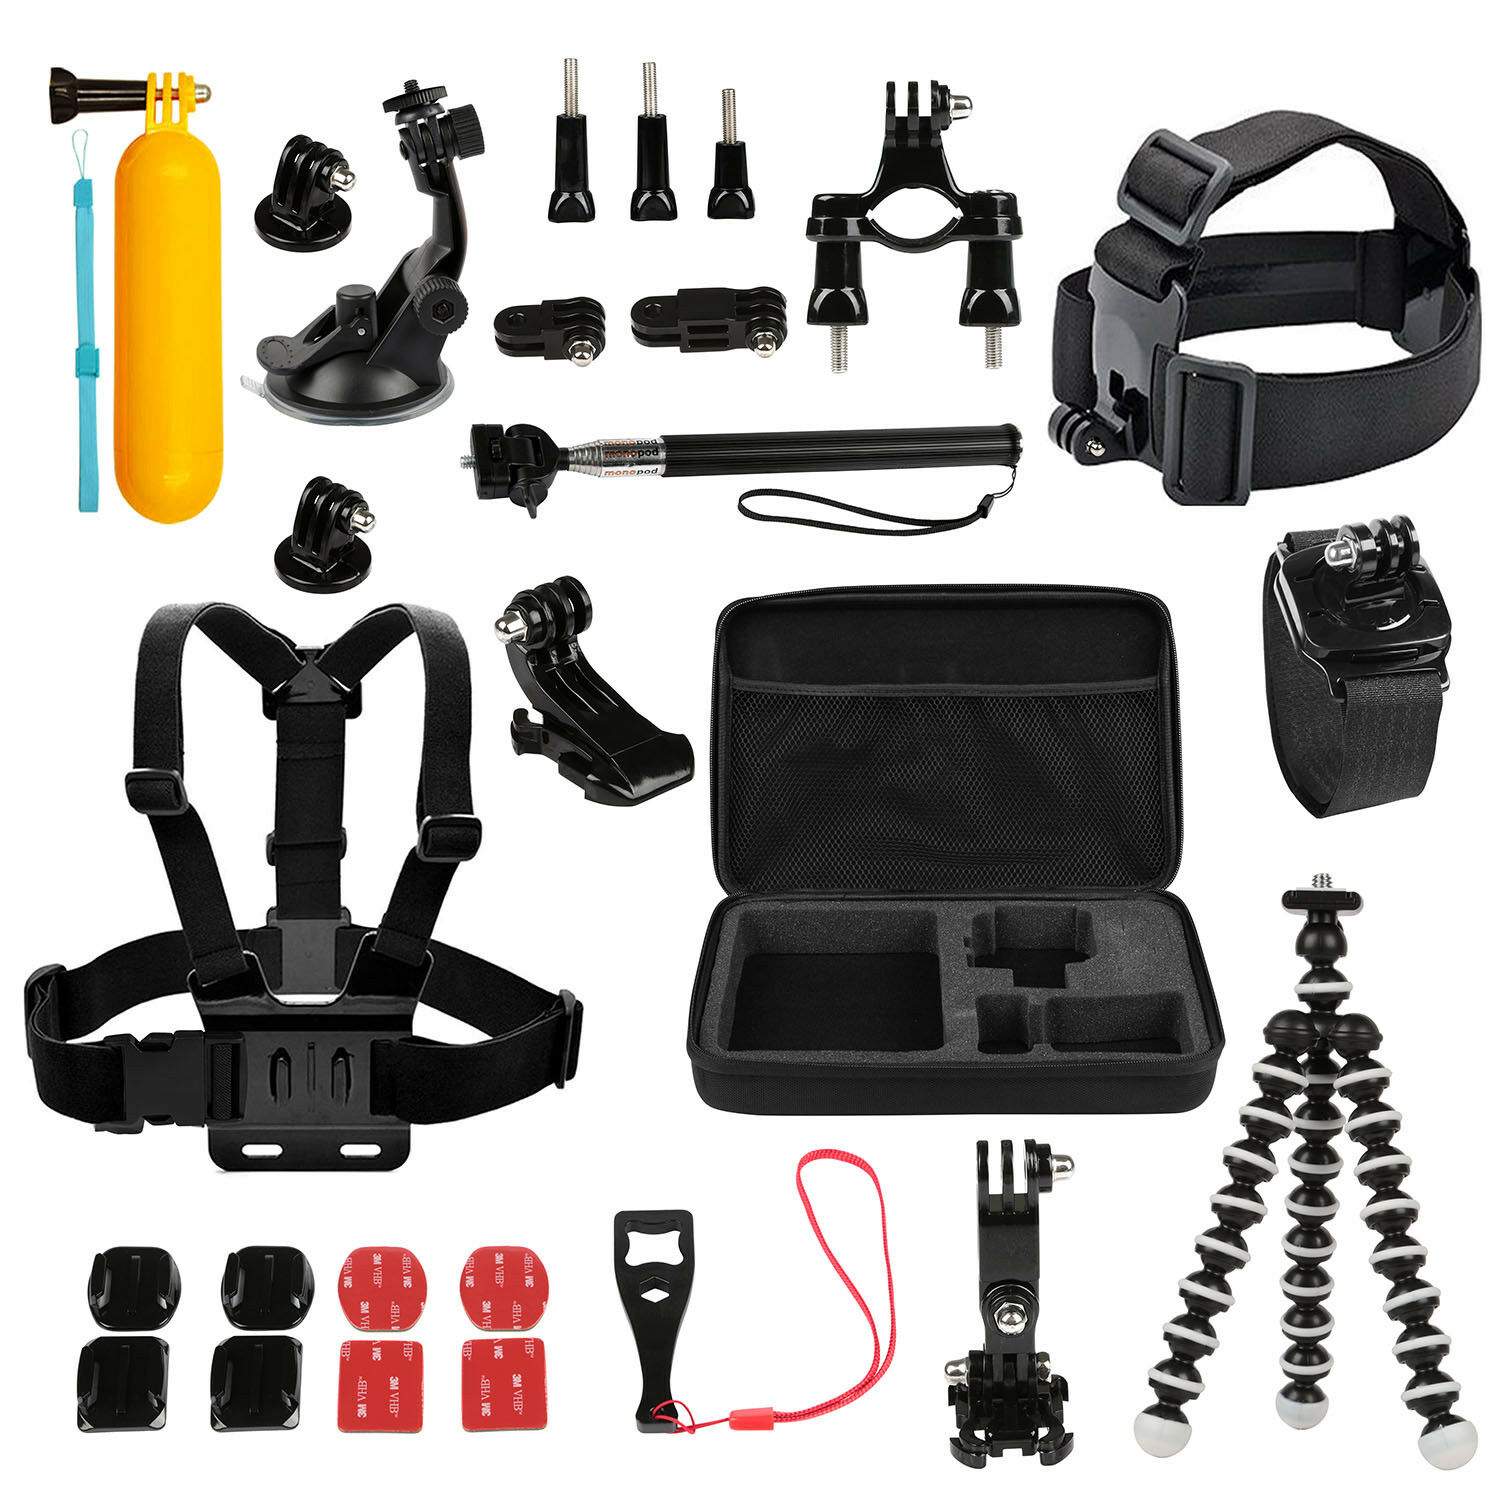 Best Accessories Kit Bundle For Gopro Hero 7 6 5 4 3 2 1 Session Mount Combo Set